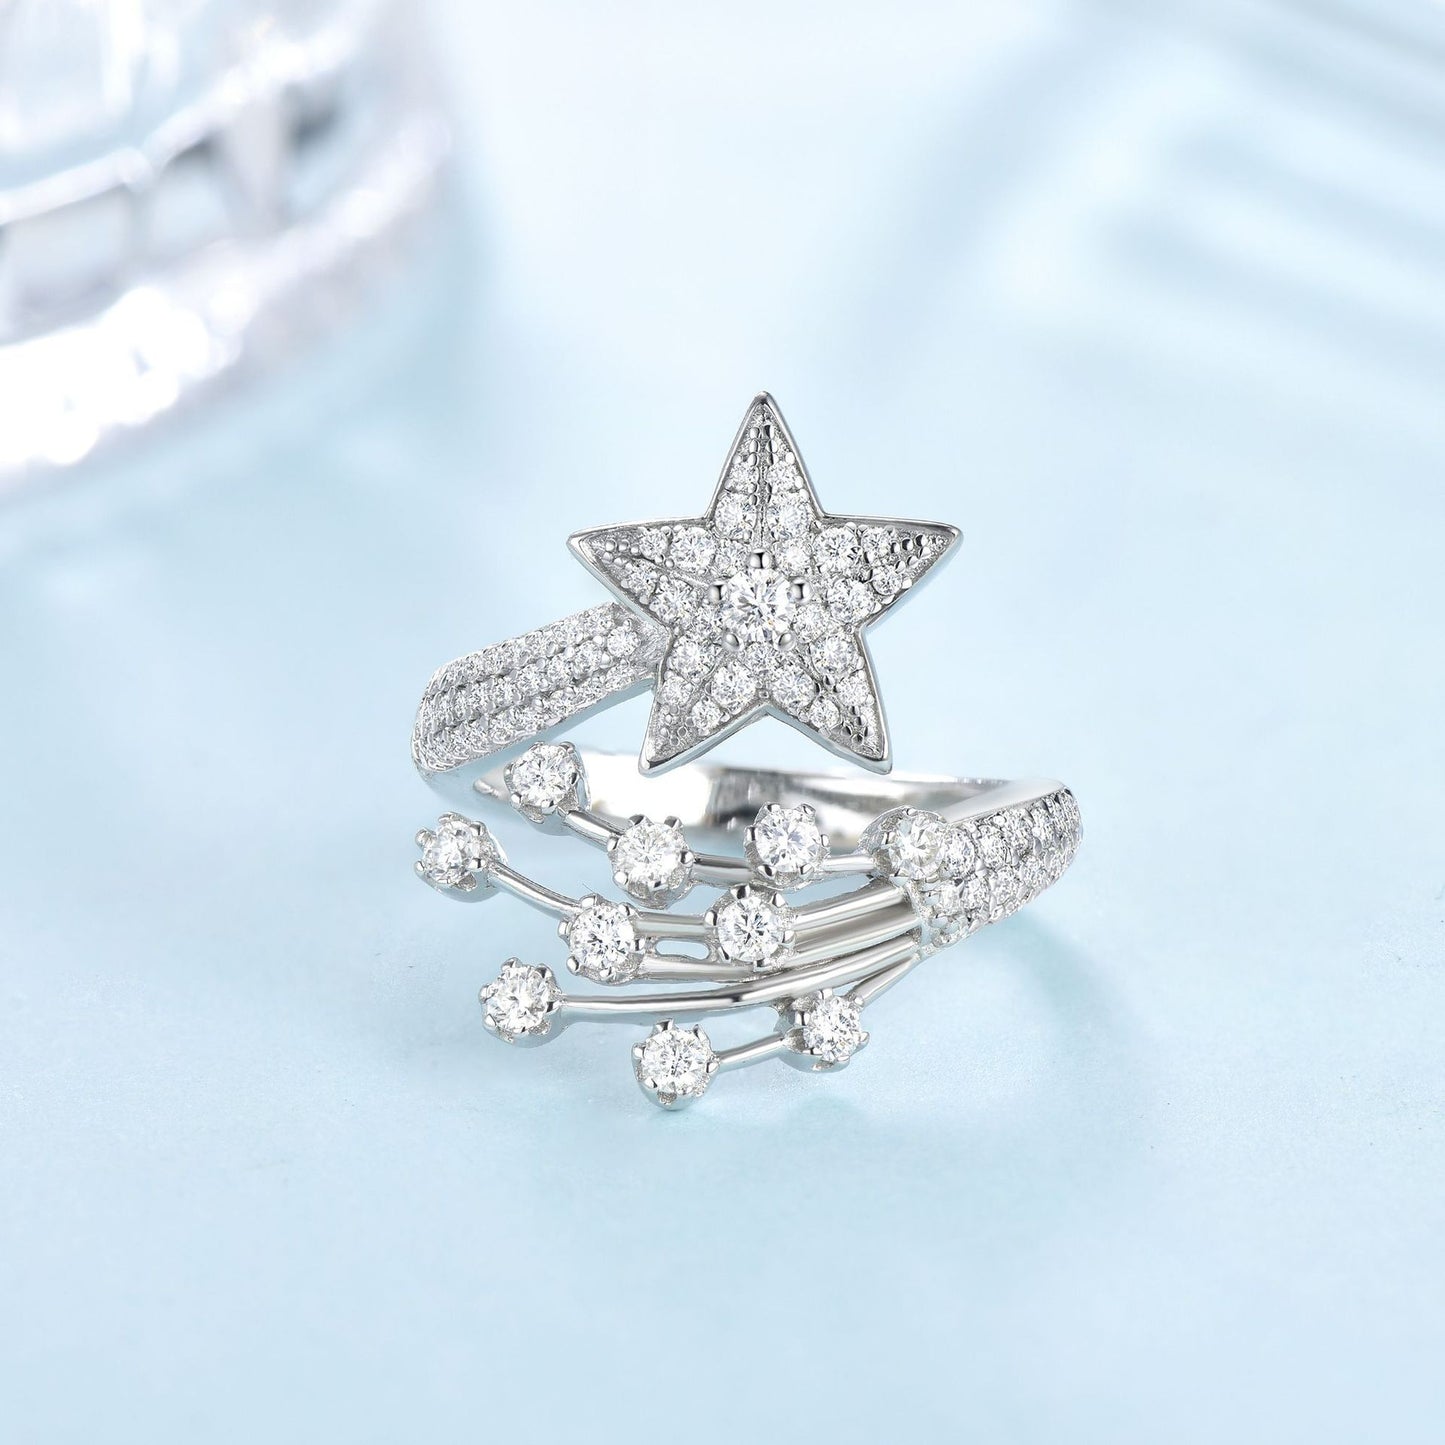 Haute couture jewelry niche design comet full diamond moissanite sterling silver five-pointed star ring open ring women